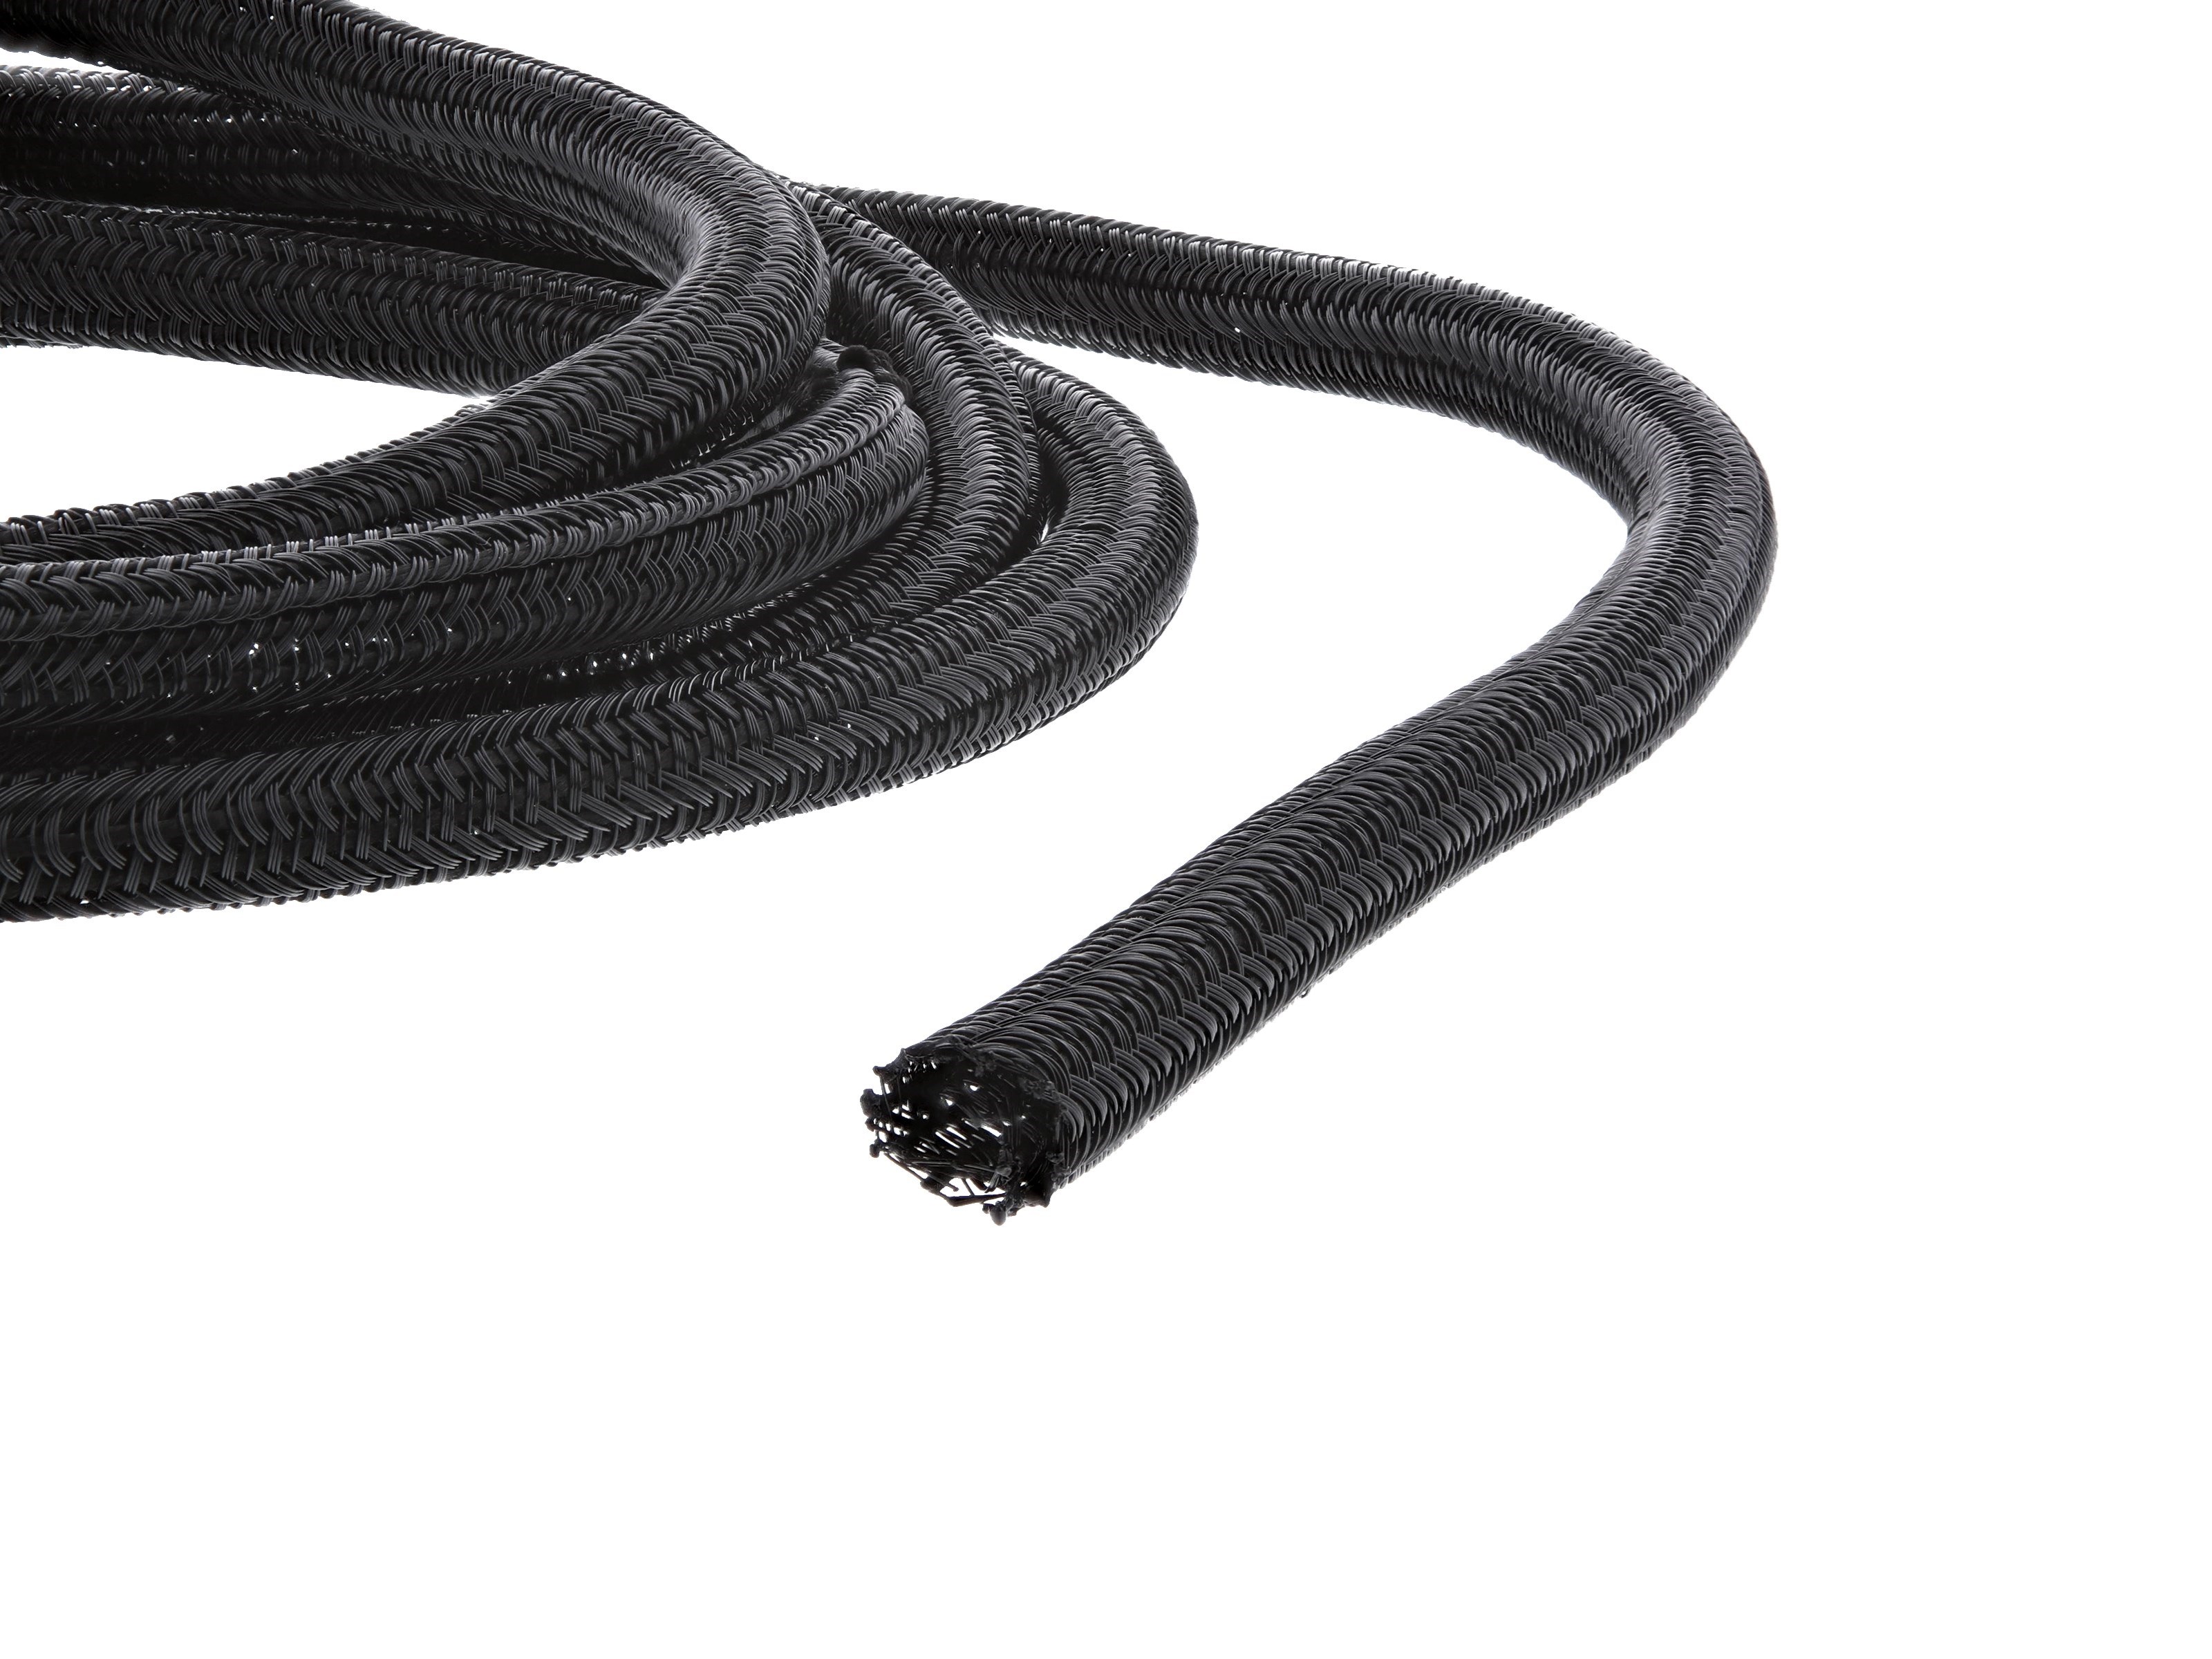 F6 Flat Self-Wrapping Braided Sleeving